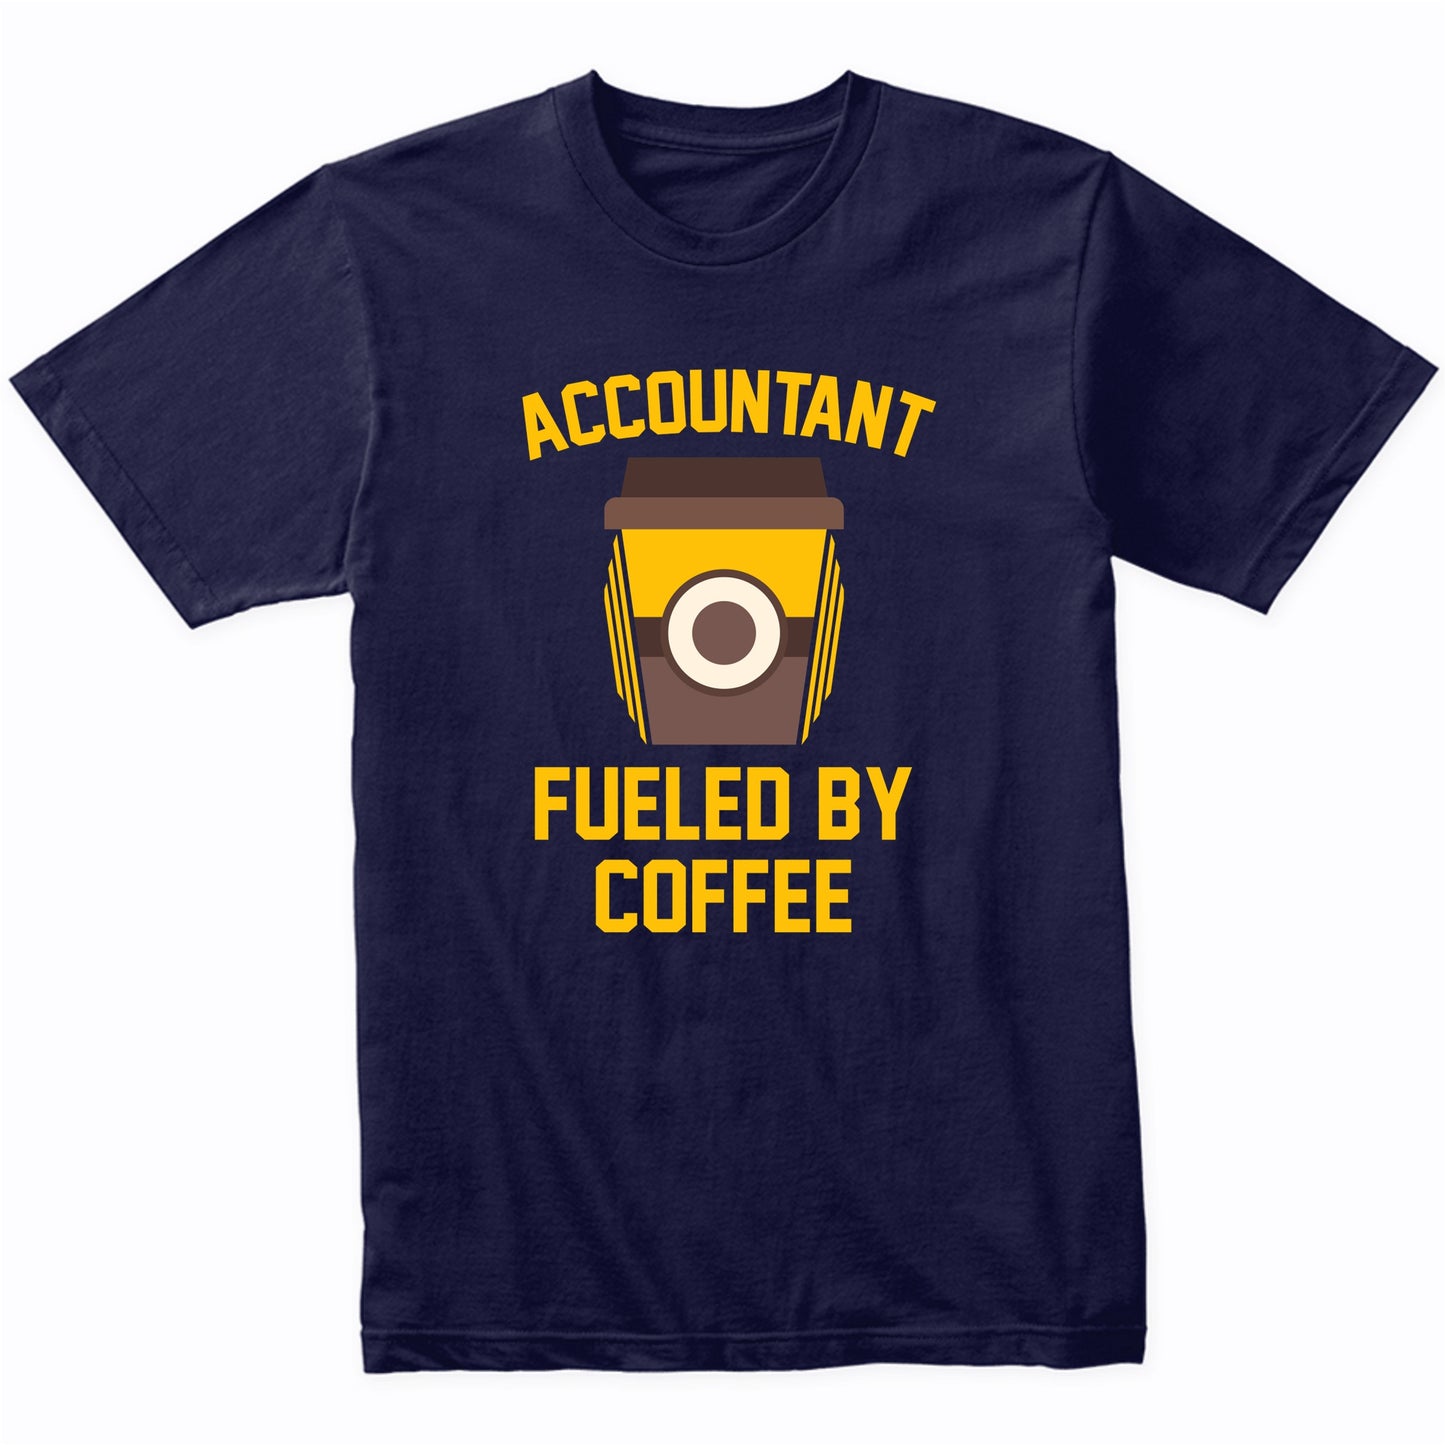 Accountant Fueled By Coffee Funny Accounting Shirt